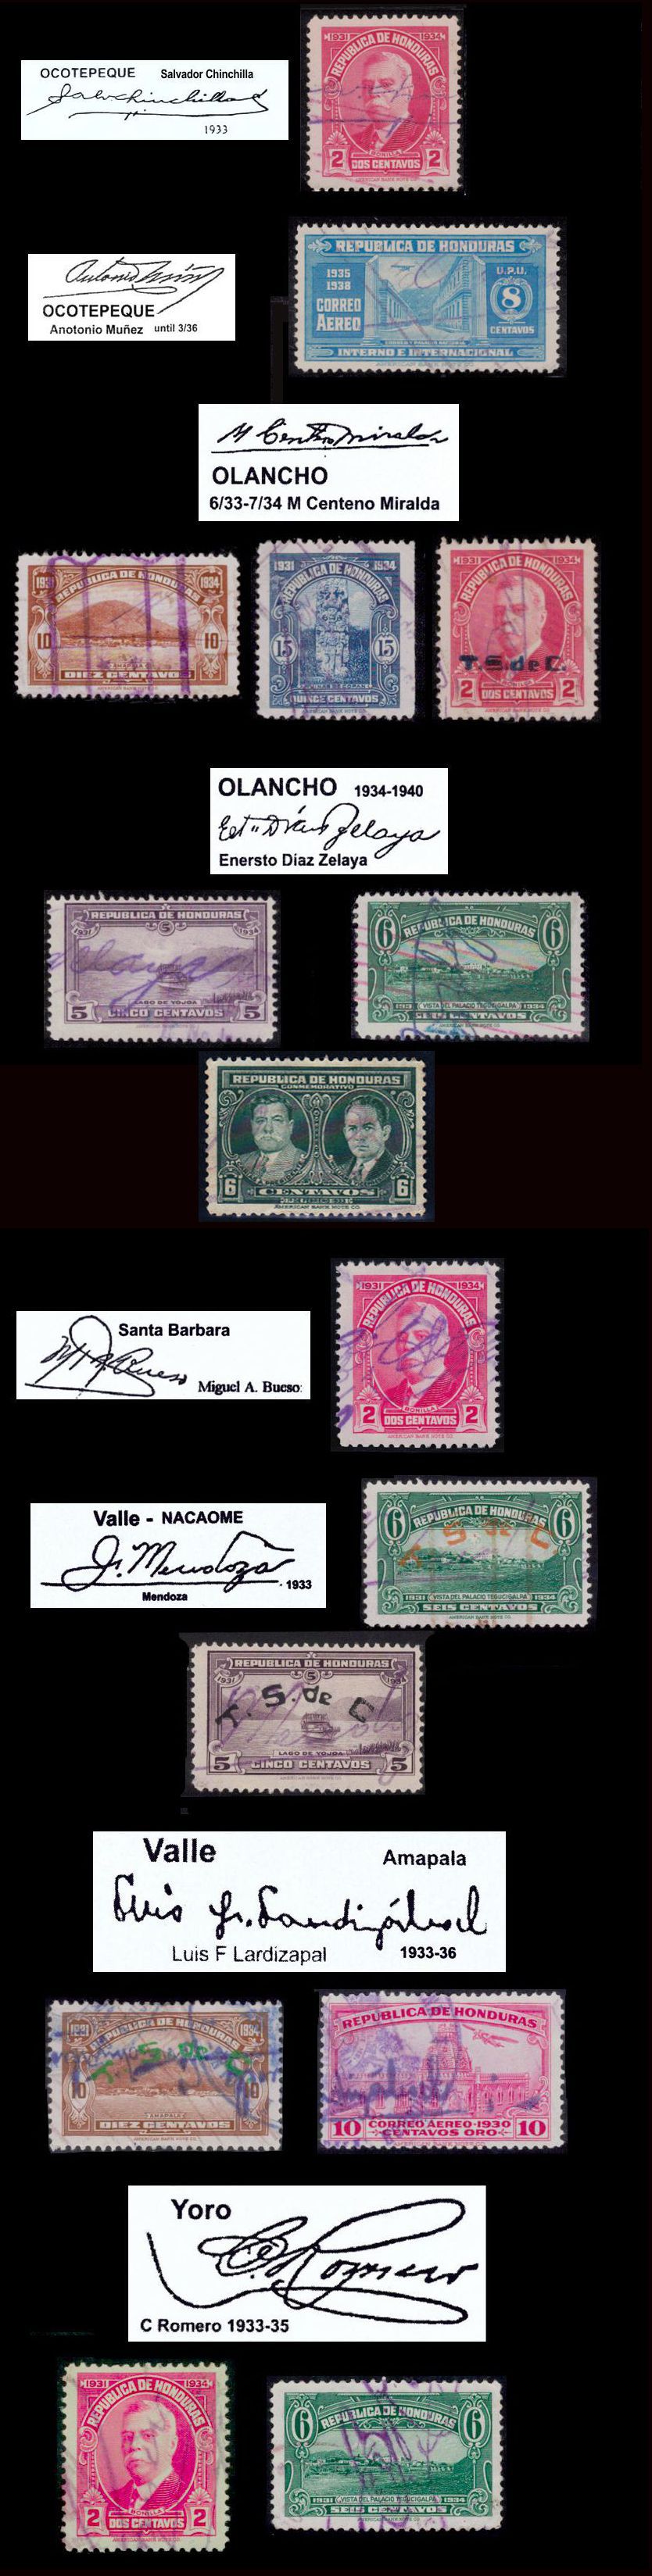 page 5 signature stamps